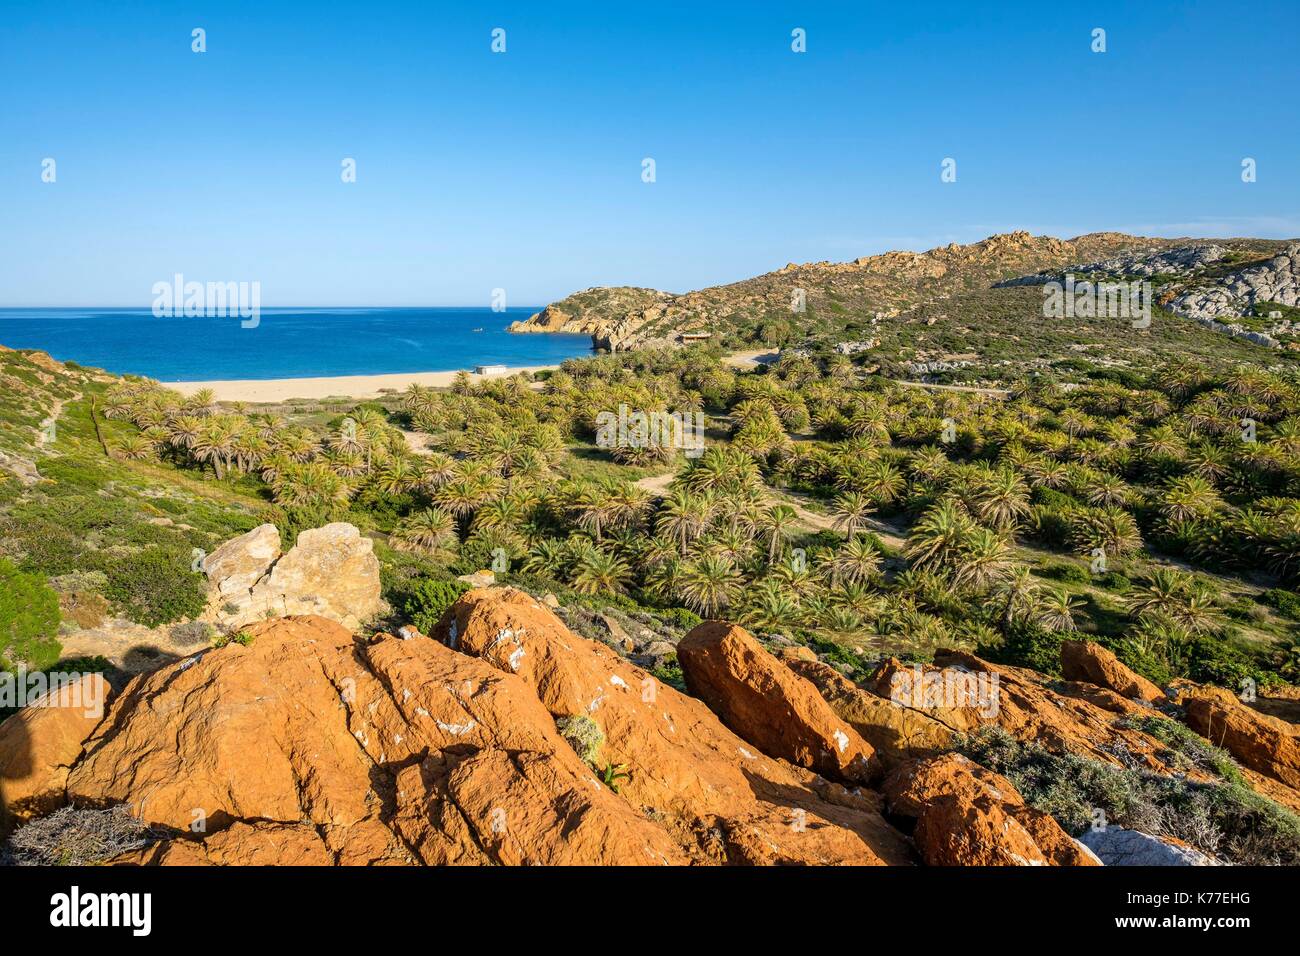 Greece, Eastern Crete, Lassithi district, Sitia Nature park is part of the UNESCO Global Geoparks, Palekastro area, Vai beach lined with a natural palm grove, unique in Europe (Phoenix Theophrastii palm trees) Stock Photo